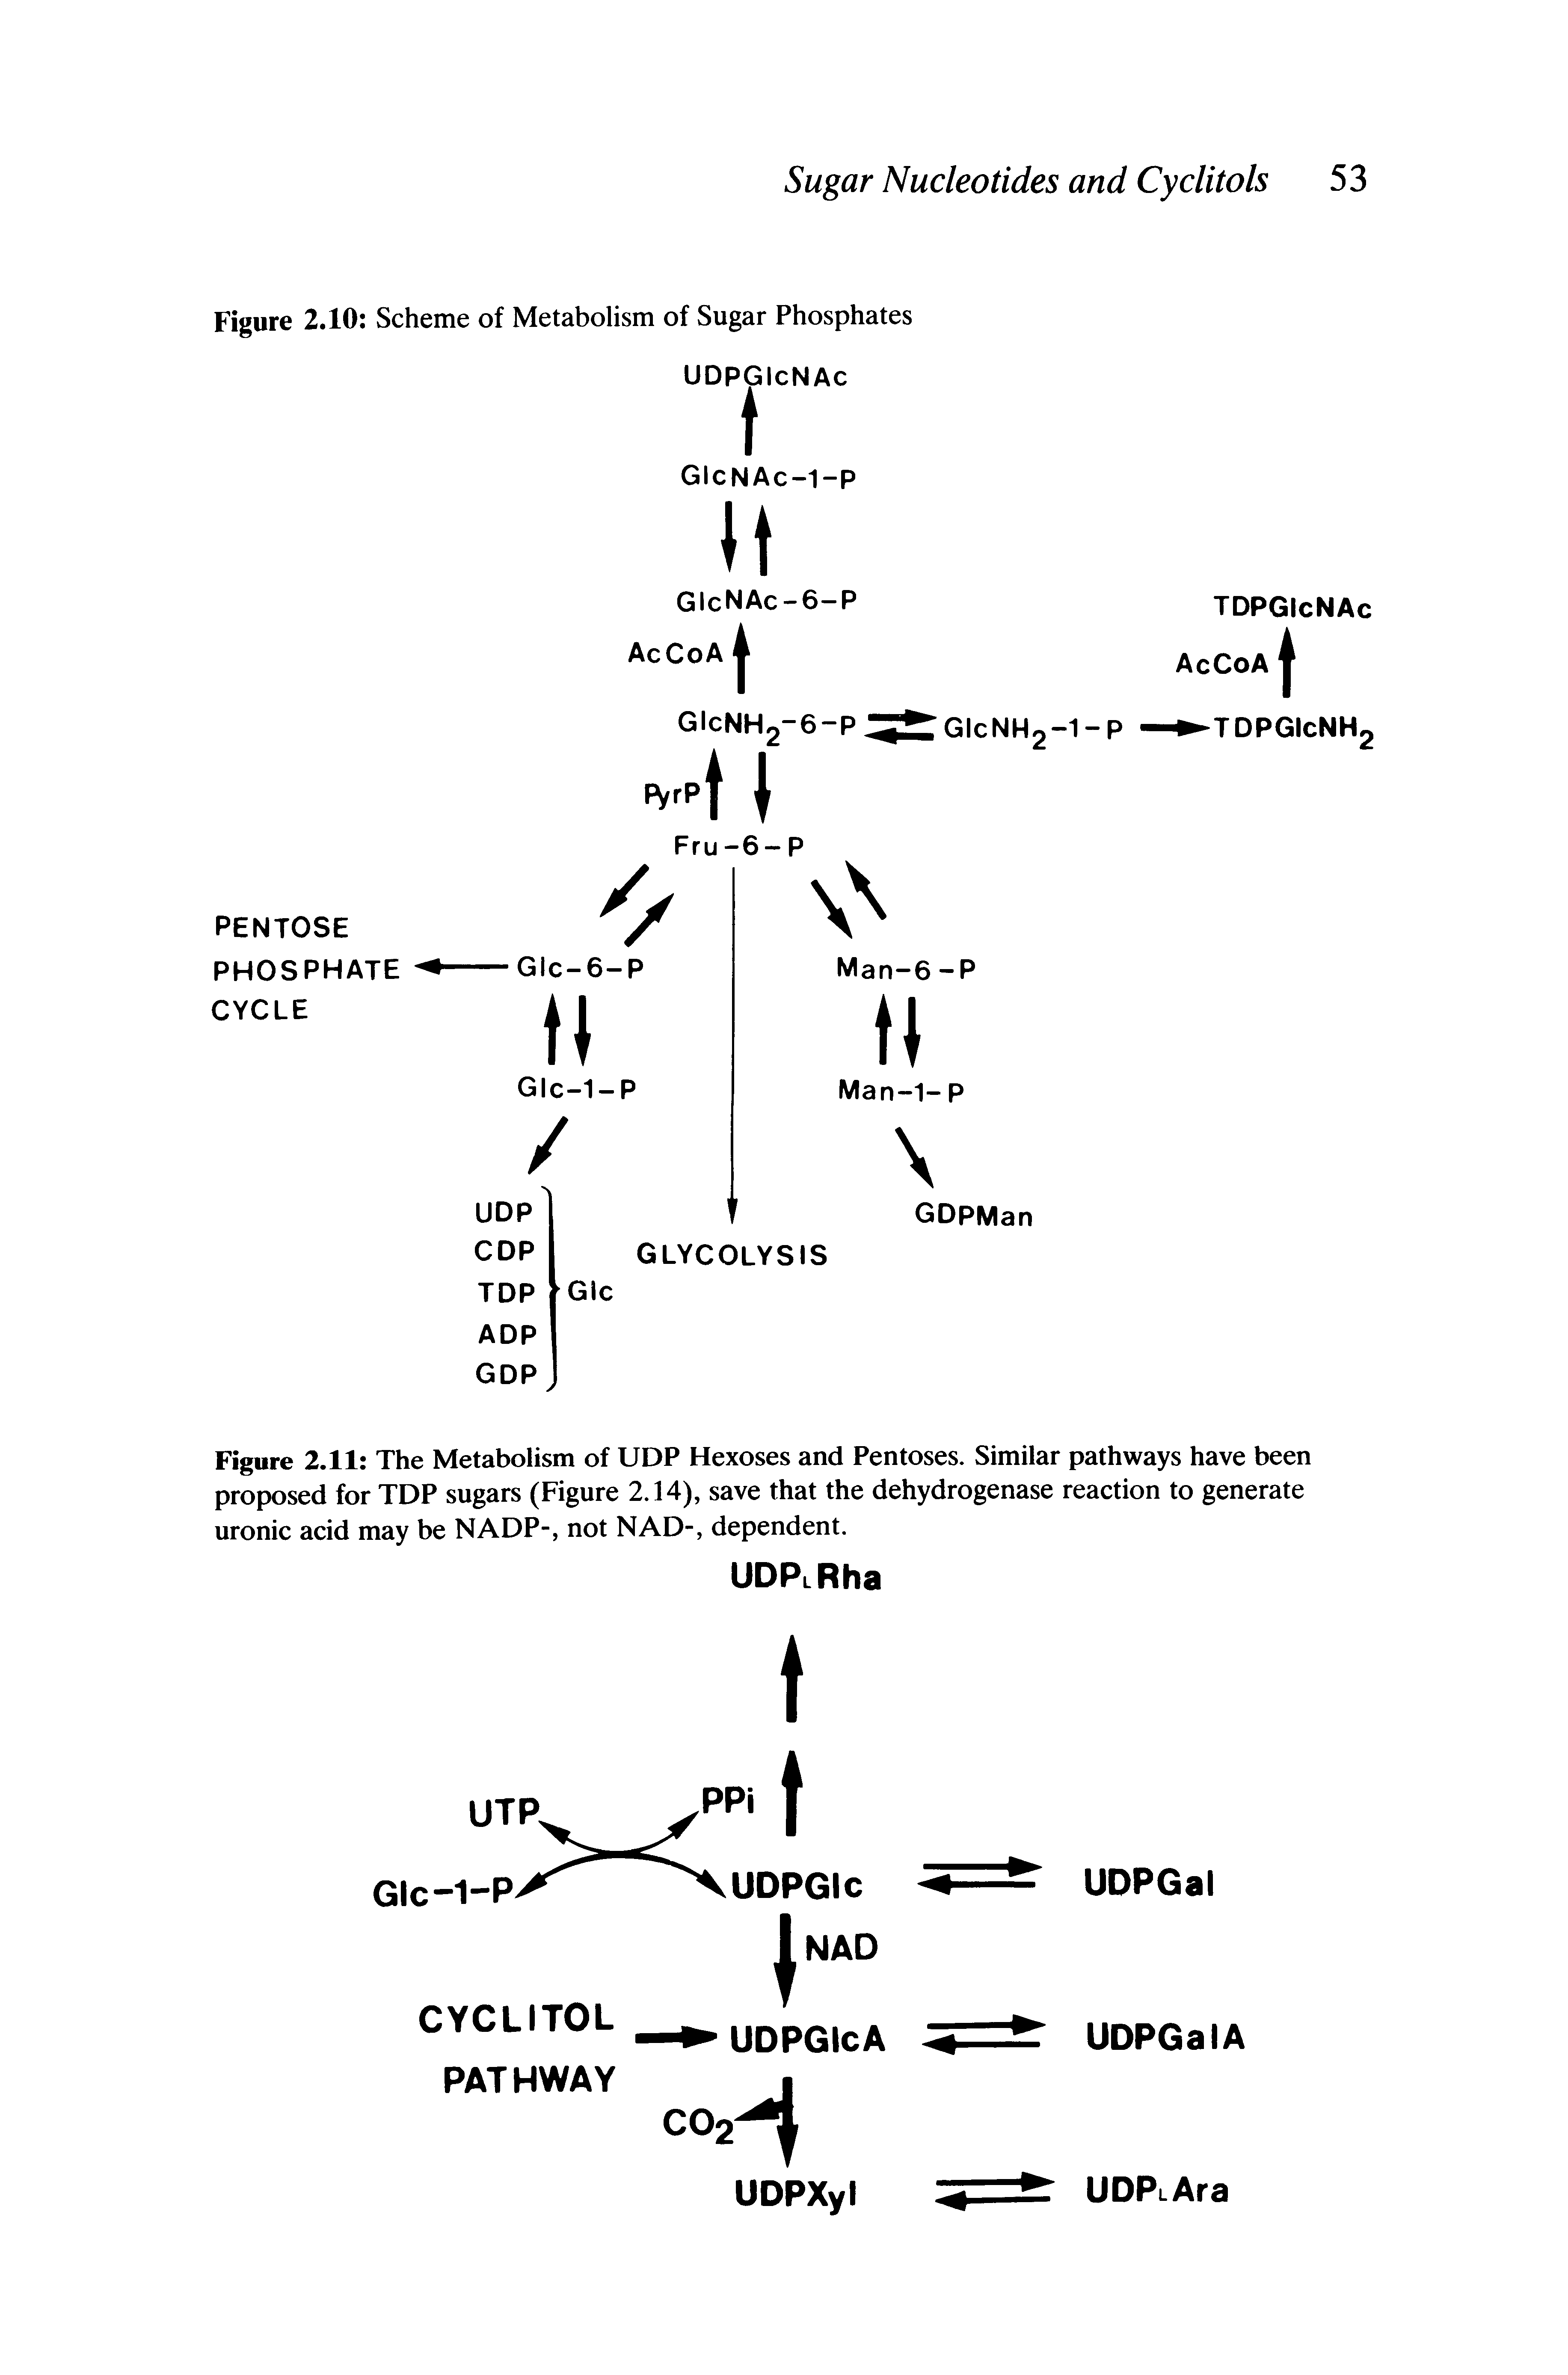 Figure 2.11 The Metabolism of UDP Hexoses and Pentoses. Similar pathways have been proposed for TDP sugars (Figure 2.14), save that the dehydrogenase reaction to generate uronic acid may be NADP-, not NAD-, dependent.